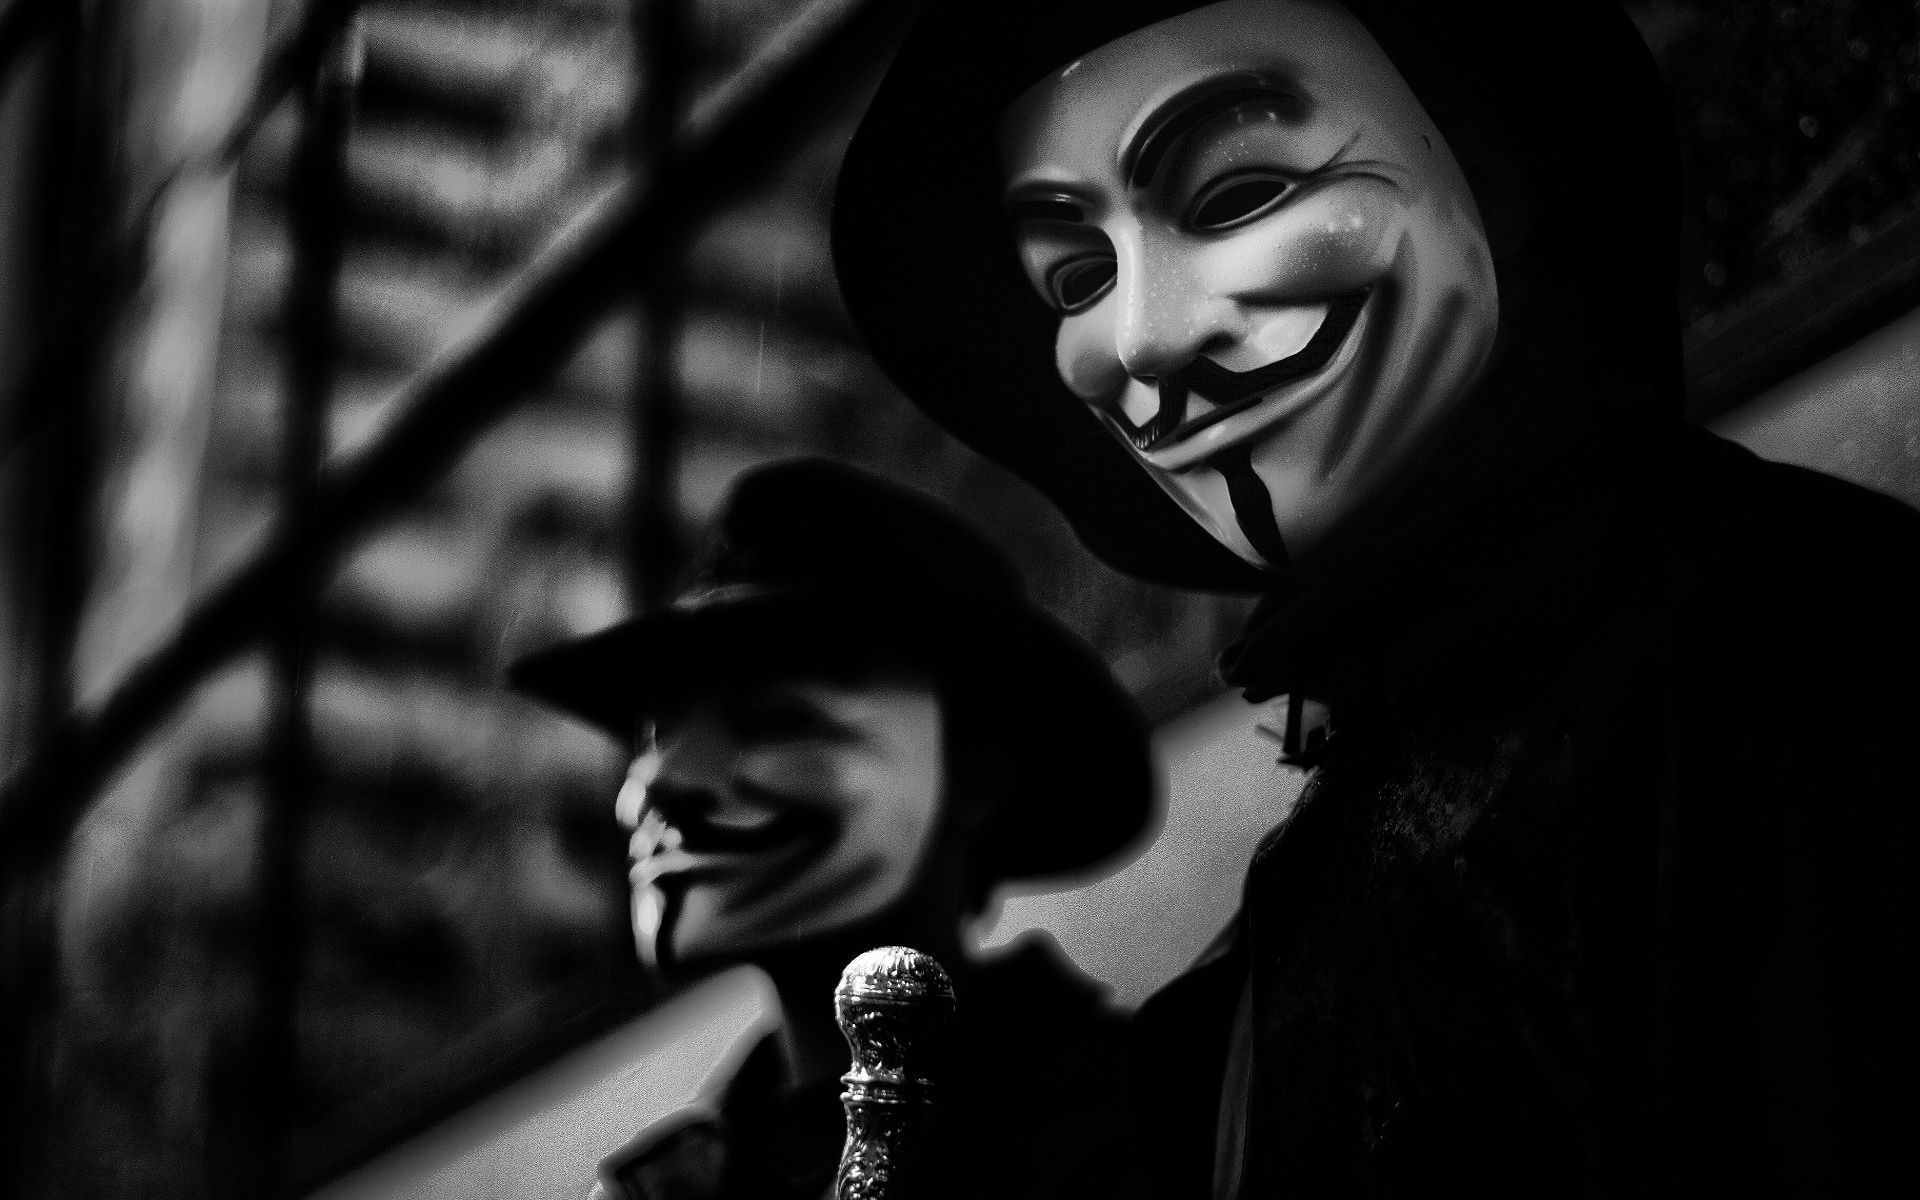 Anonymous desktop wallpapers in high quality - Hacktivist group